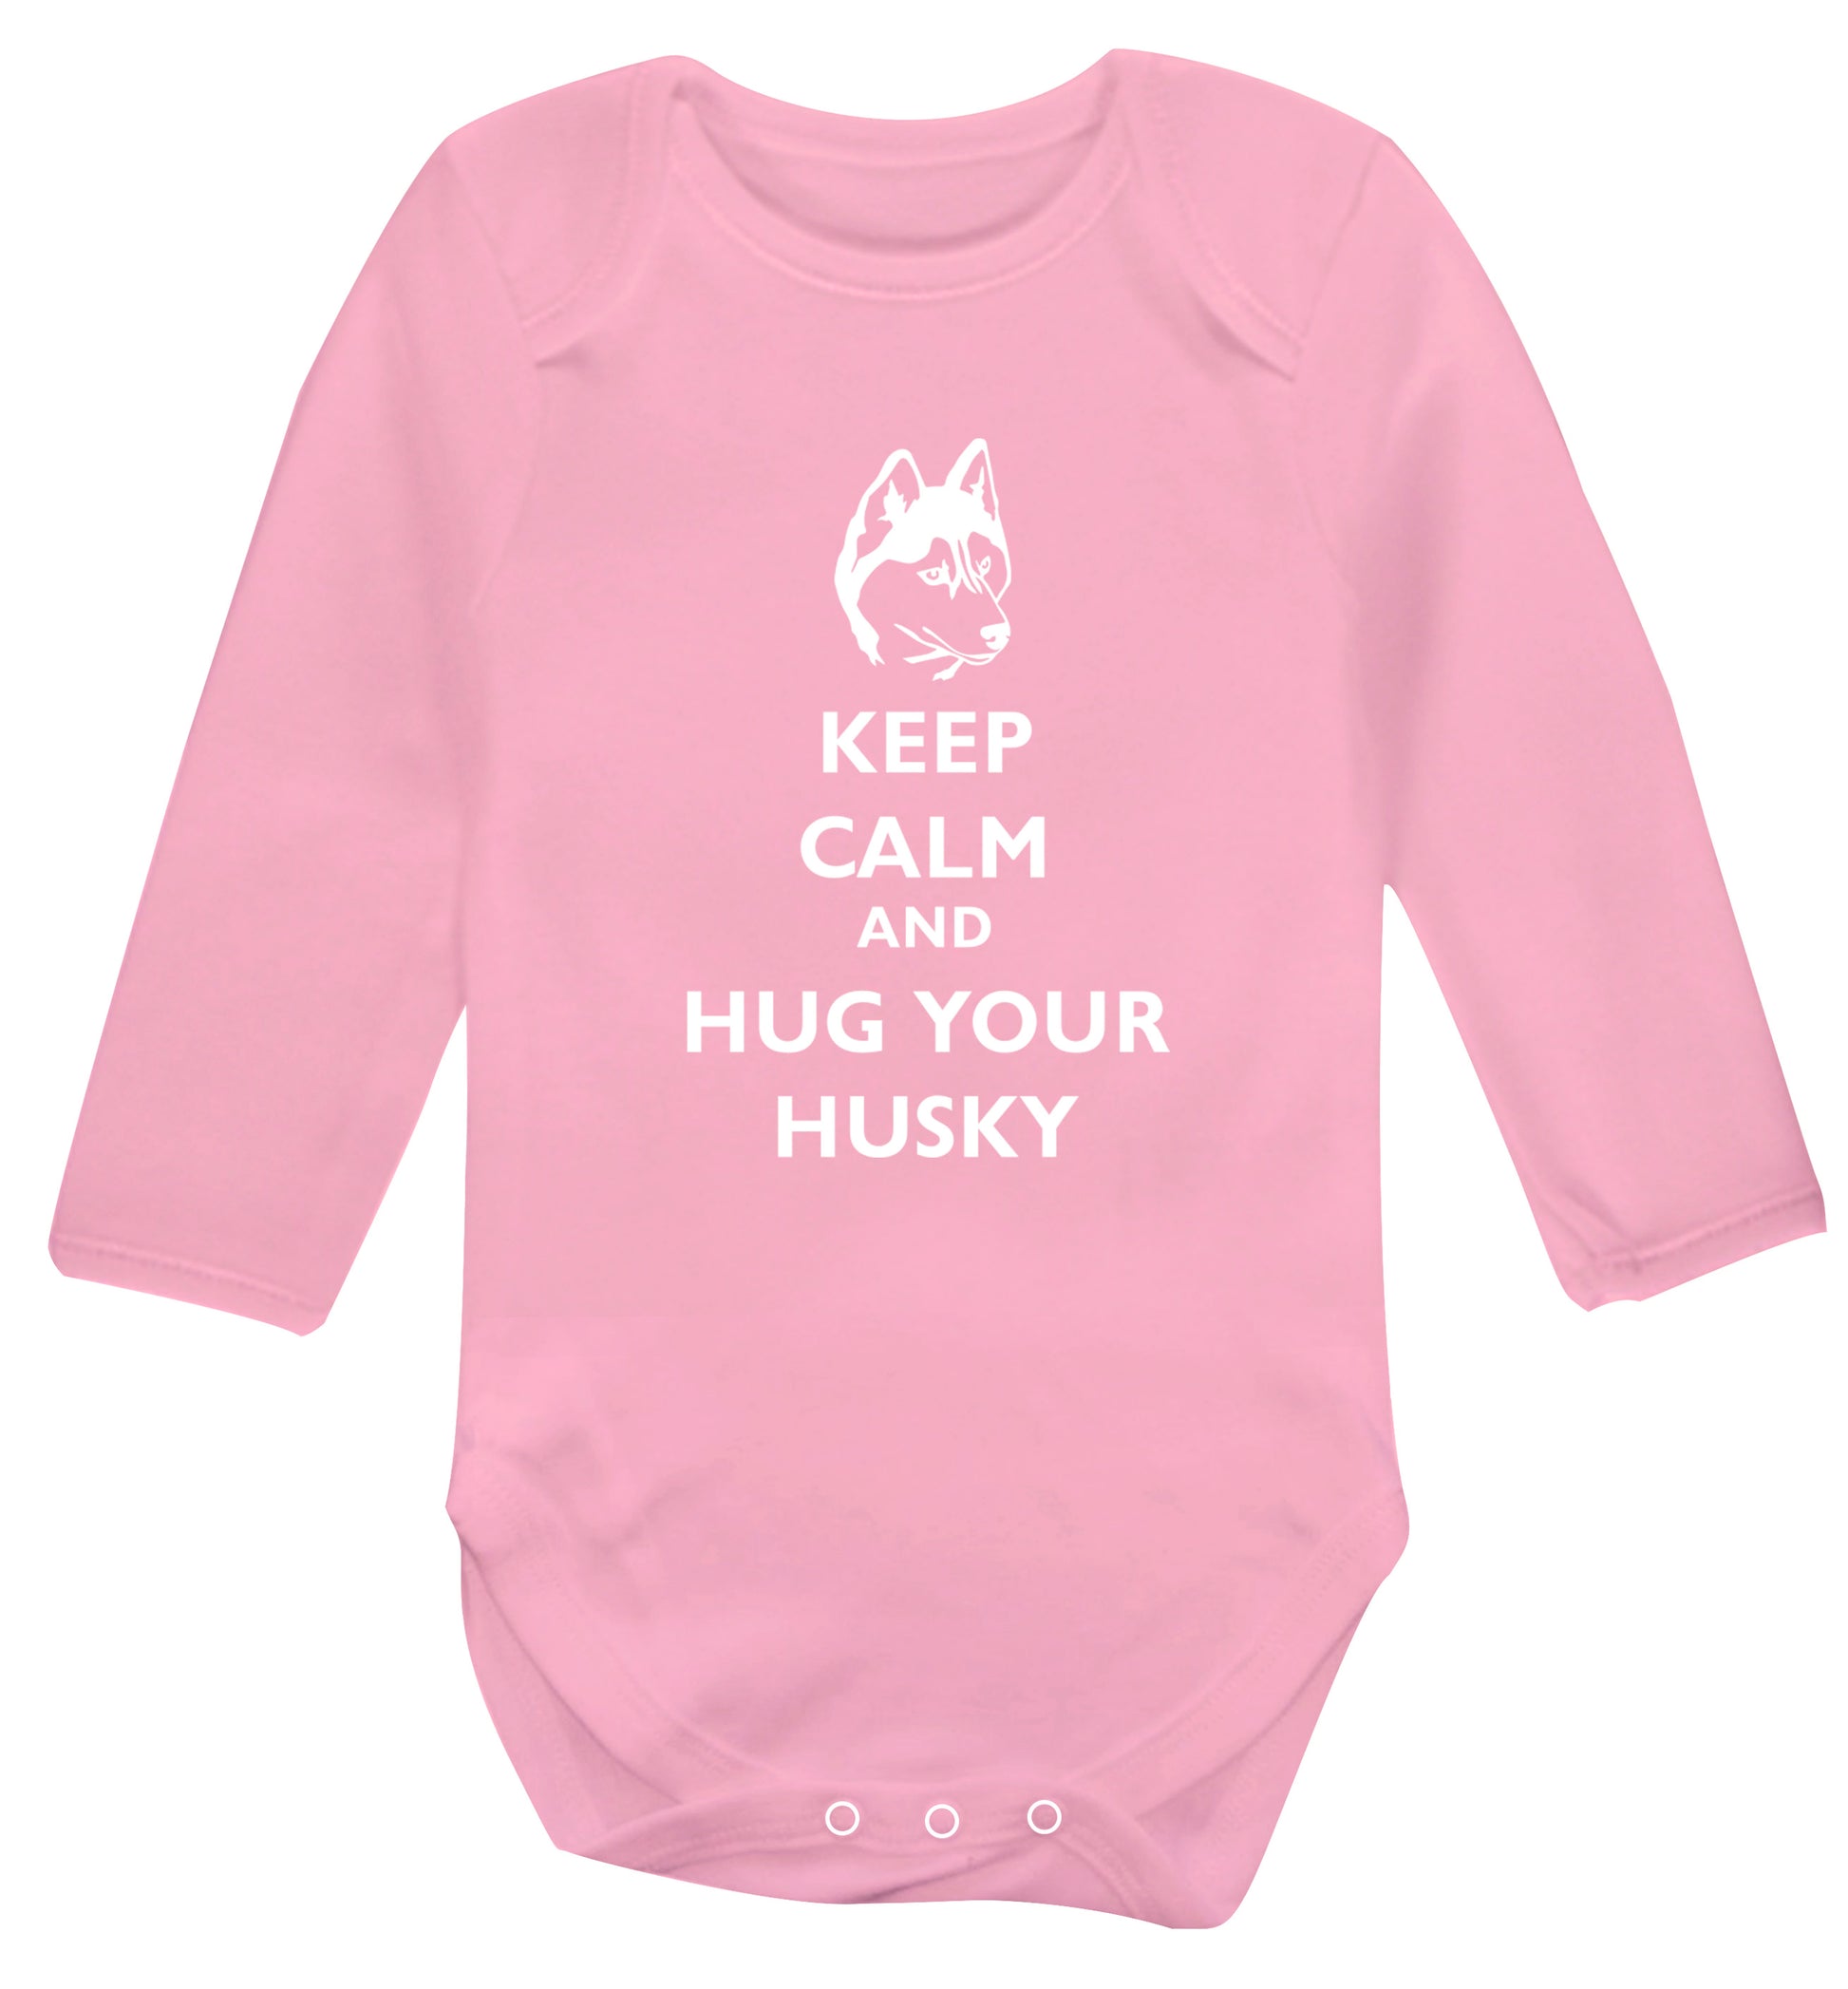 Keep calm and hug your husky Baby Vest long sleeved pale pink 6-12 months